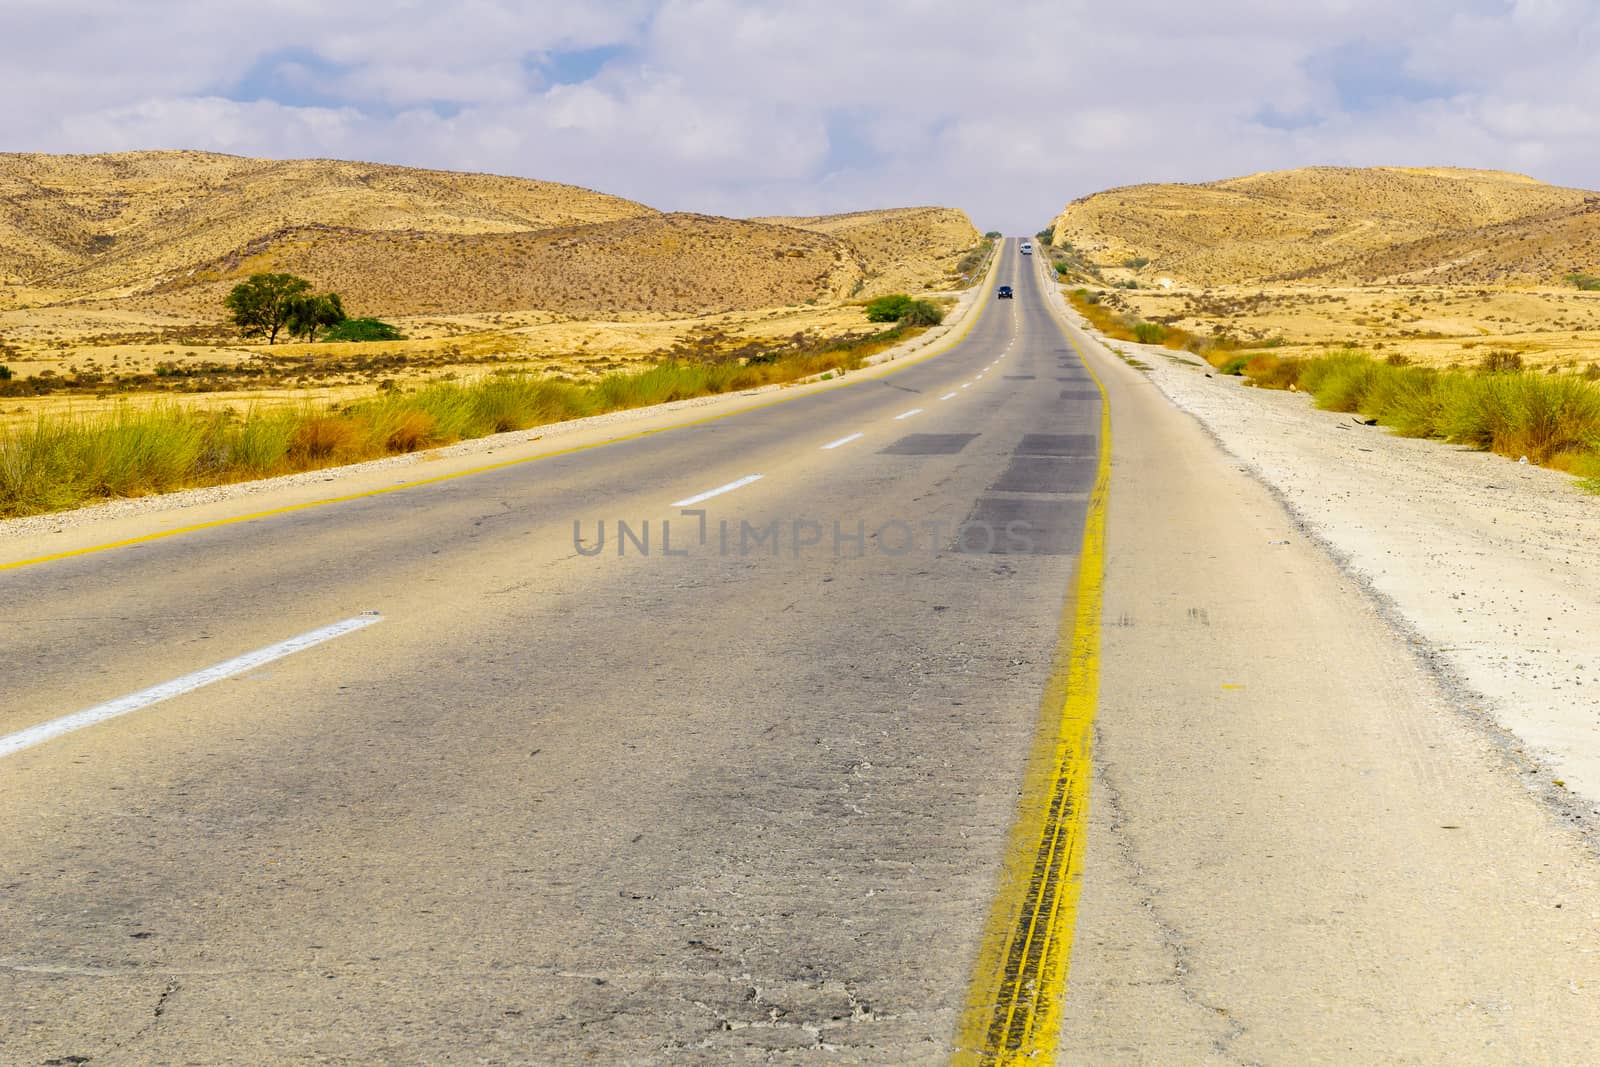 View of a desert road in the Negev Desert, Southern Israel